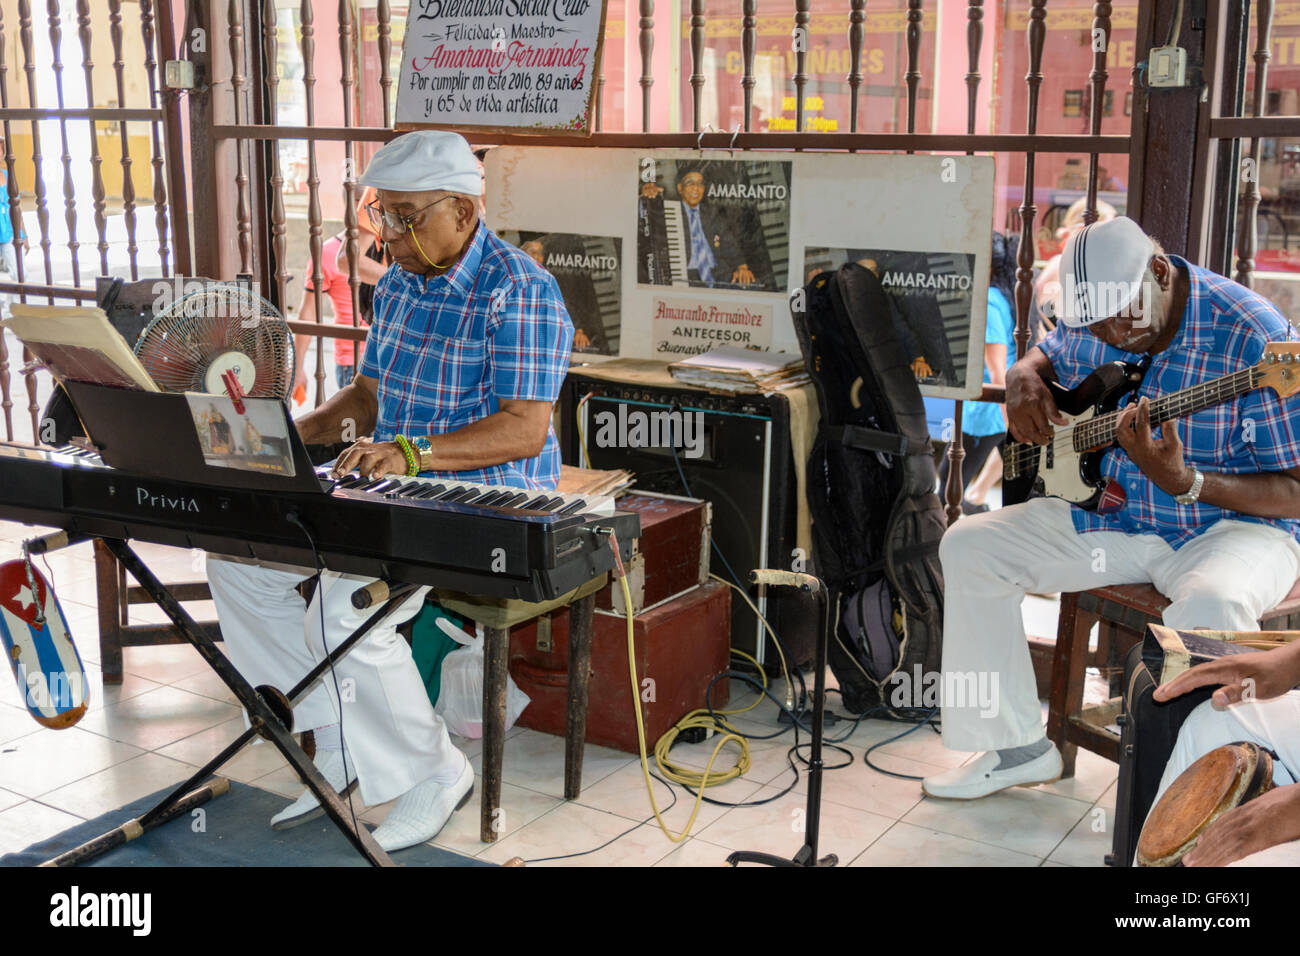 Pianist Amaranto Fernandez and his band playing in Cafe Vinales in Old Havana, Havana, Cuba Stock Photo